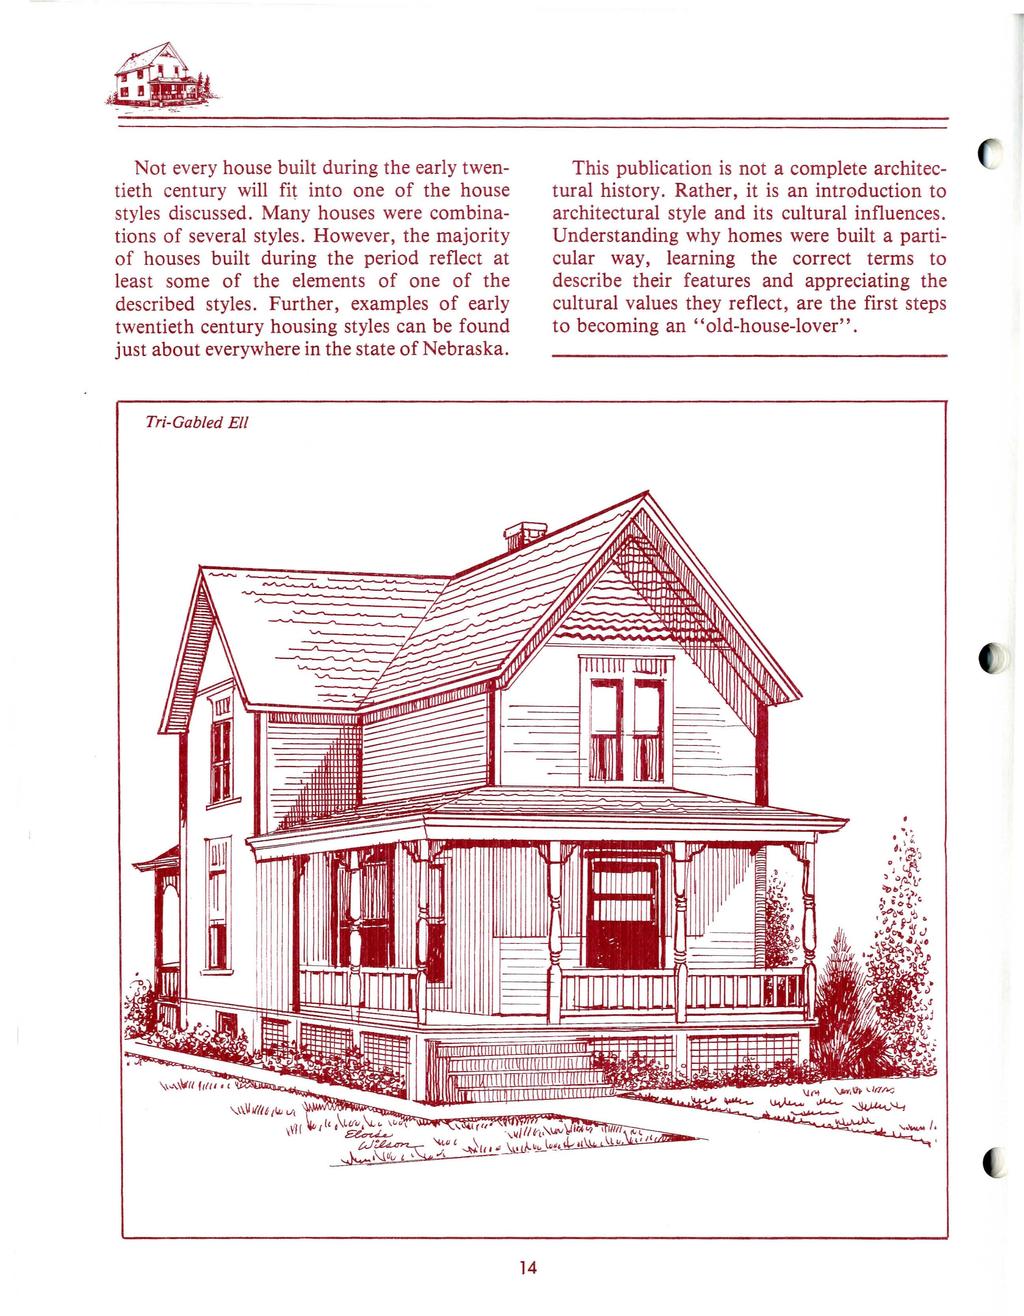 Not every house built during the early twentieth century will fit into one of the house styles discussed. Many houses were combinations of several styles.